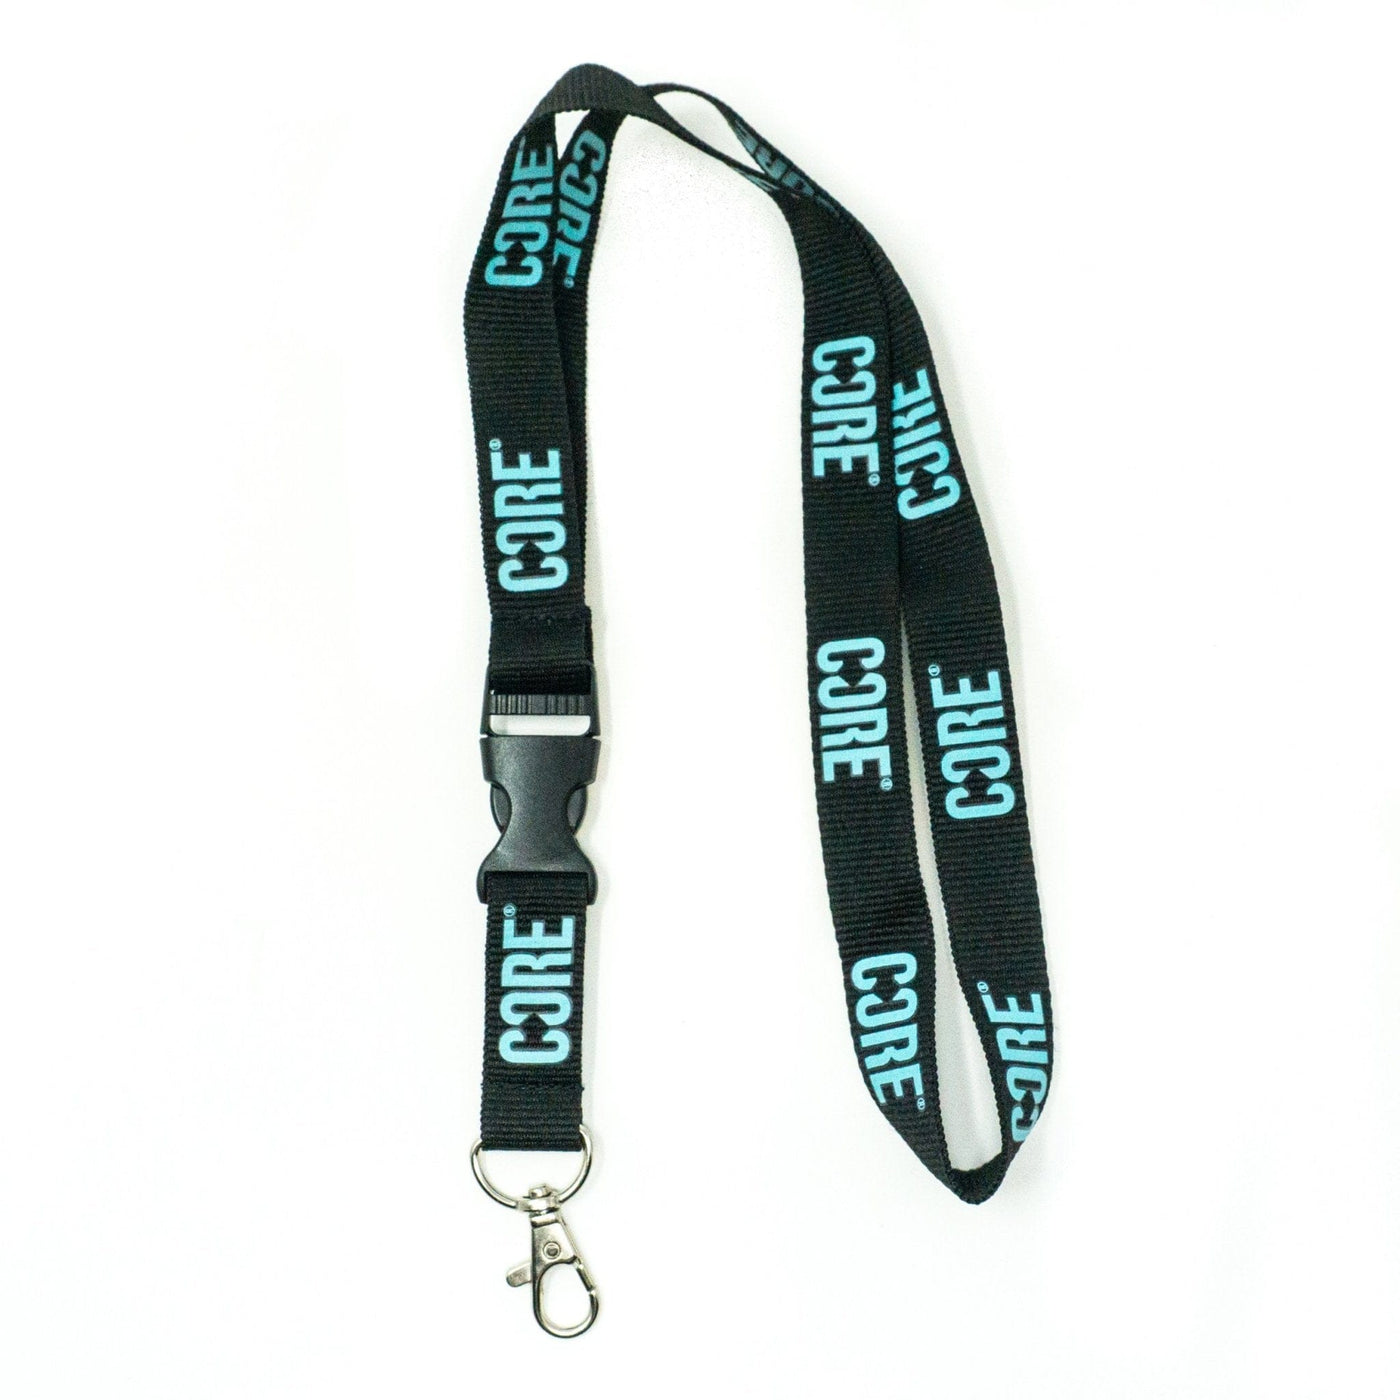 CORE Lanyard Keychain - Black/Teal - CORE Protection